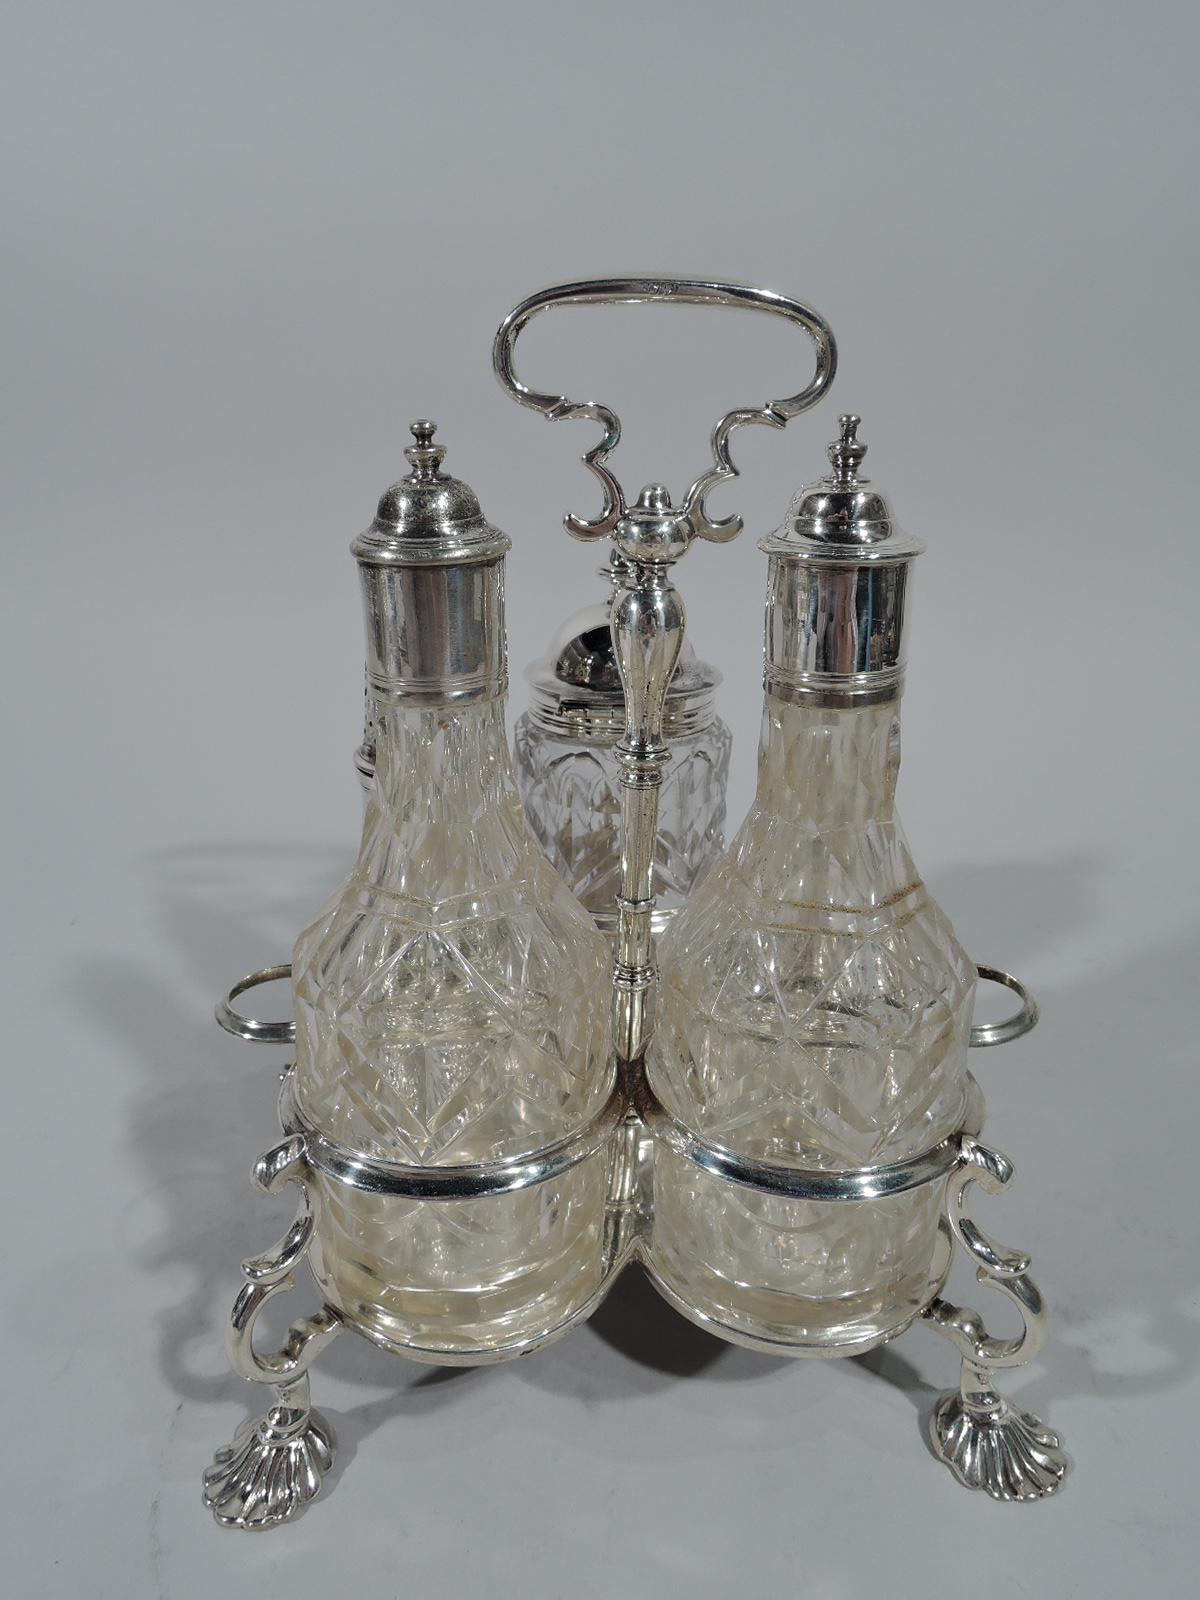 George II sterling silver cruet stand. Made by Samuel Wood in London in 1752. Cinquefoil base with four double-scroll mounts supporting seven-ring frame (of which two for stoppers). Each mount terminates in scallop shell foot. Central knopped pole